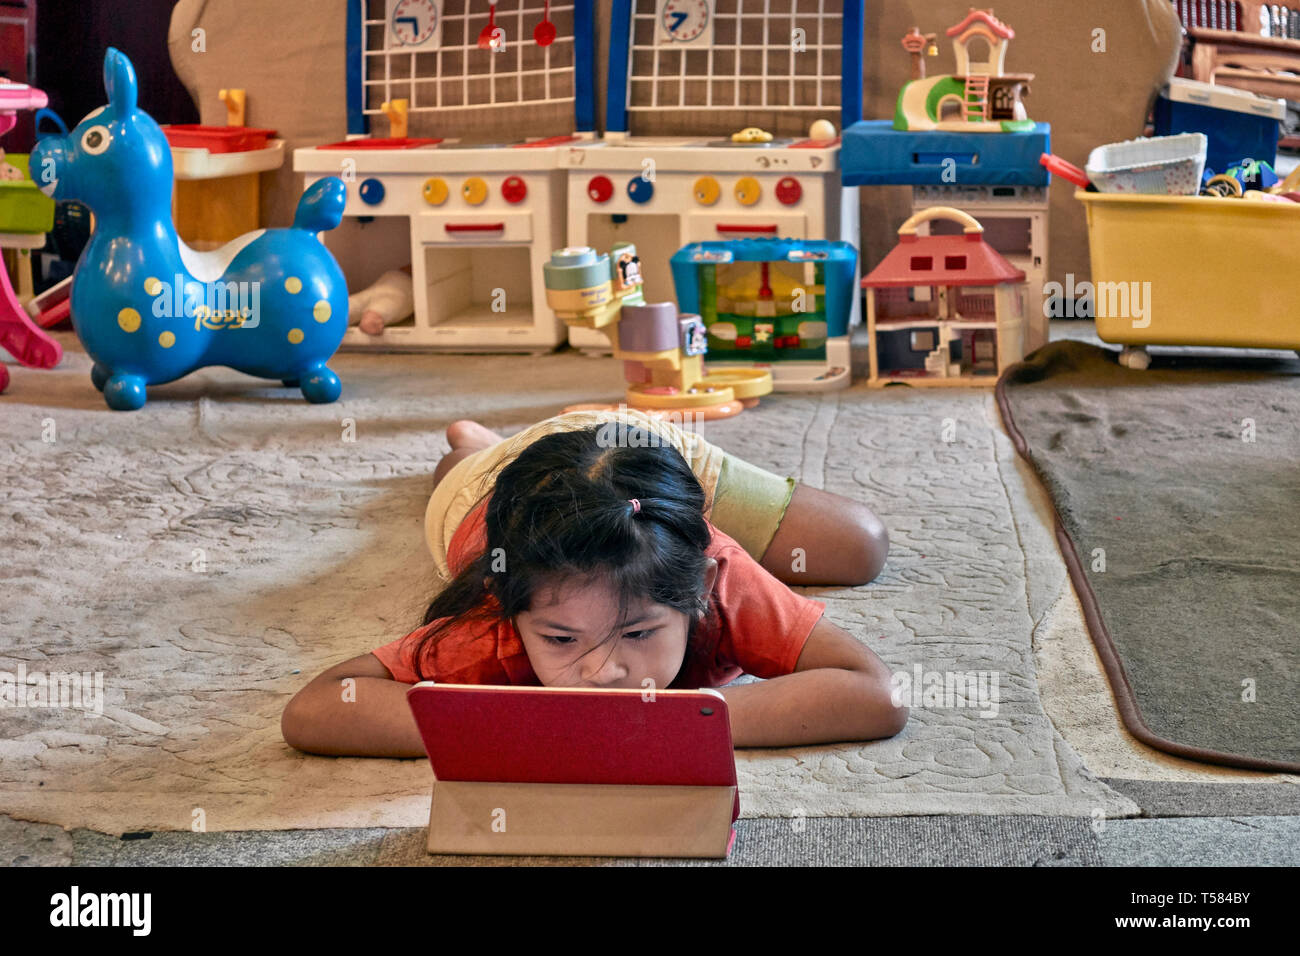 child with Ipad. Young girl engrossed with her modern Ipad and ignoring her traditional toys. Concept of old v new. Stock Photo